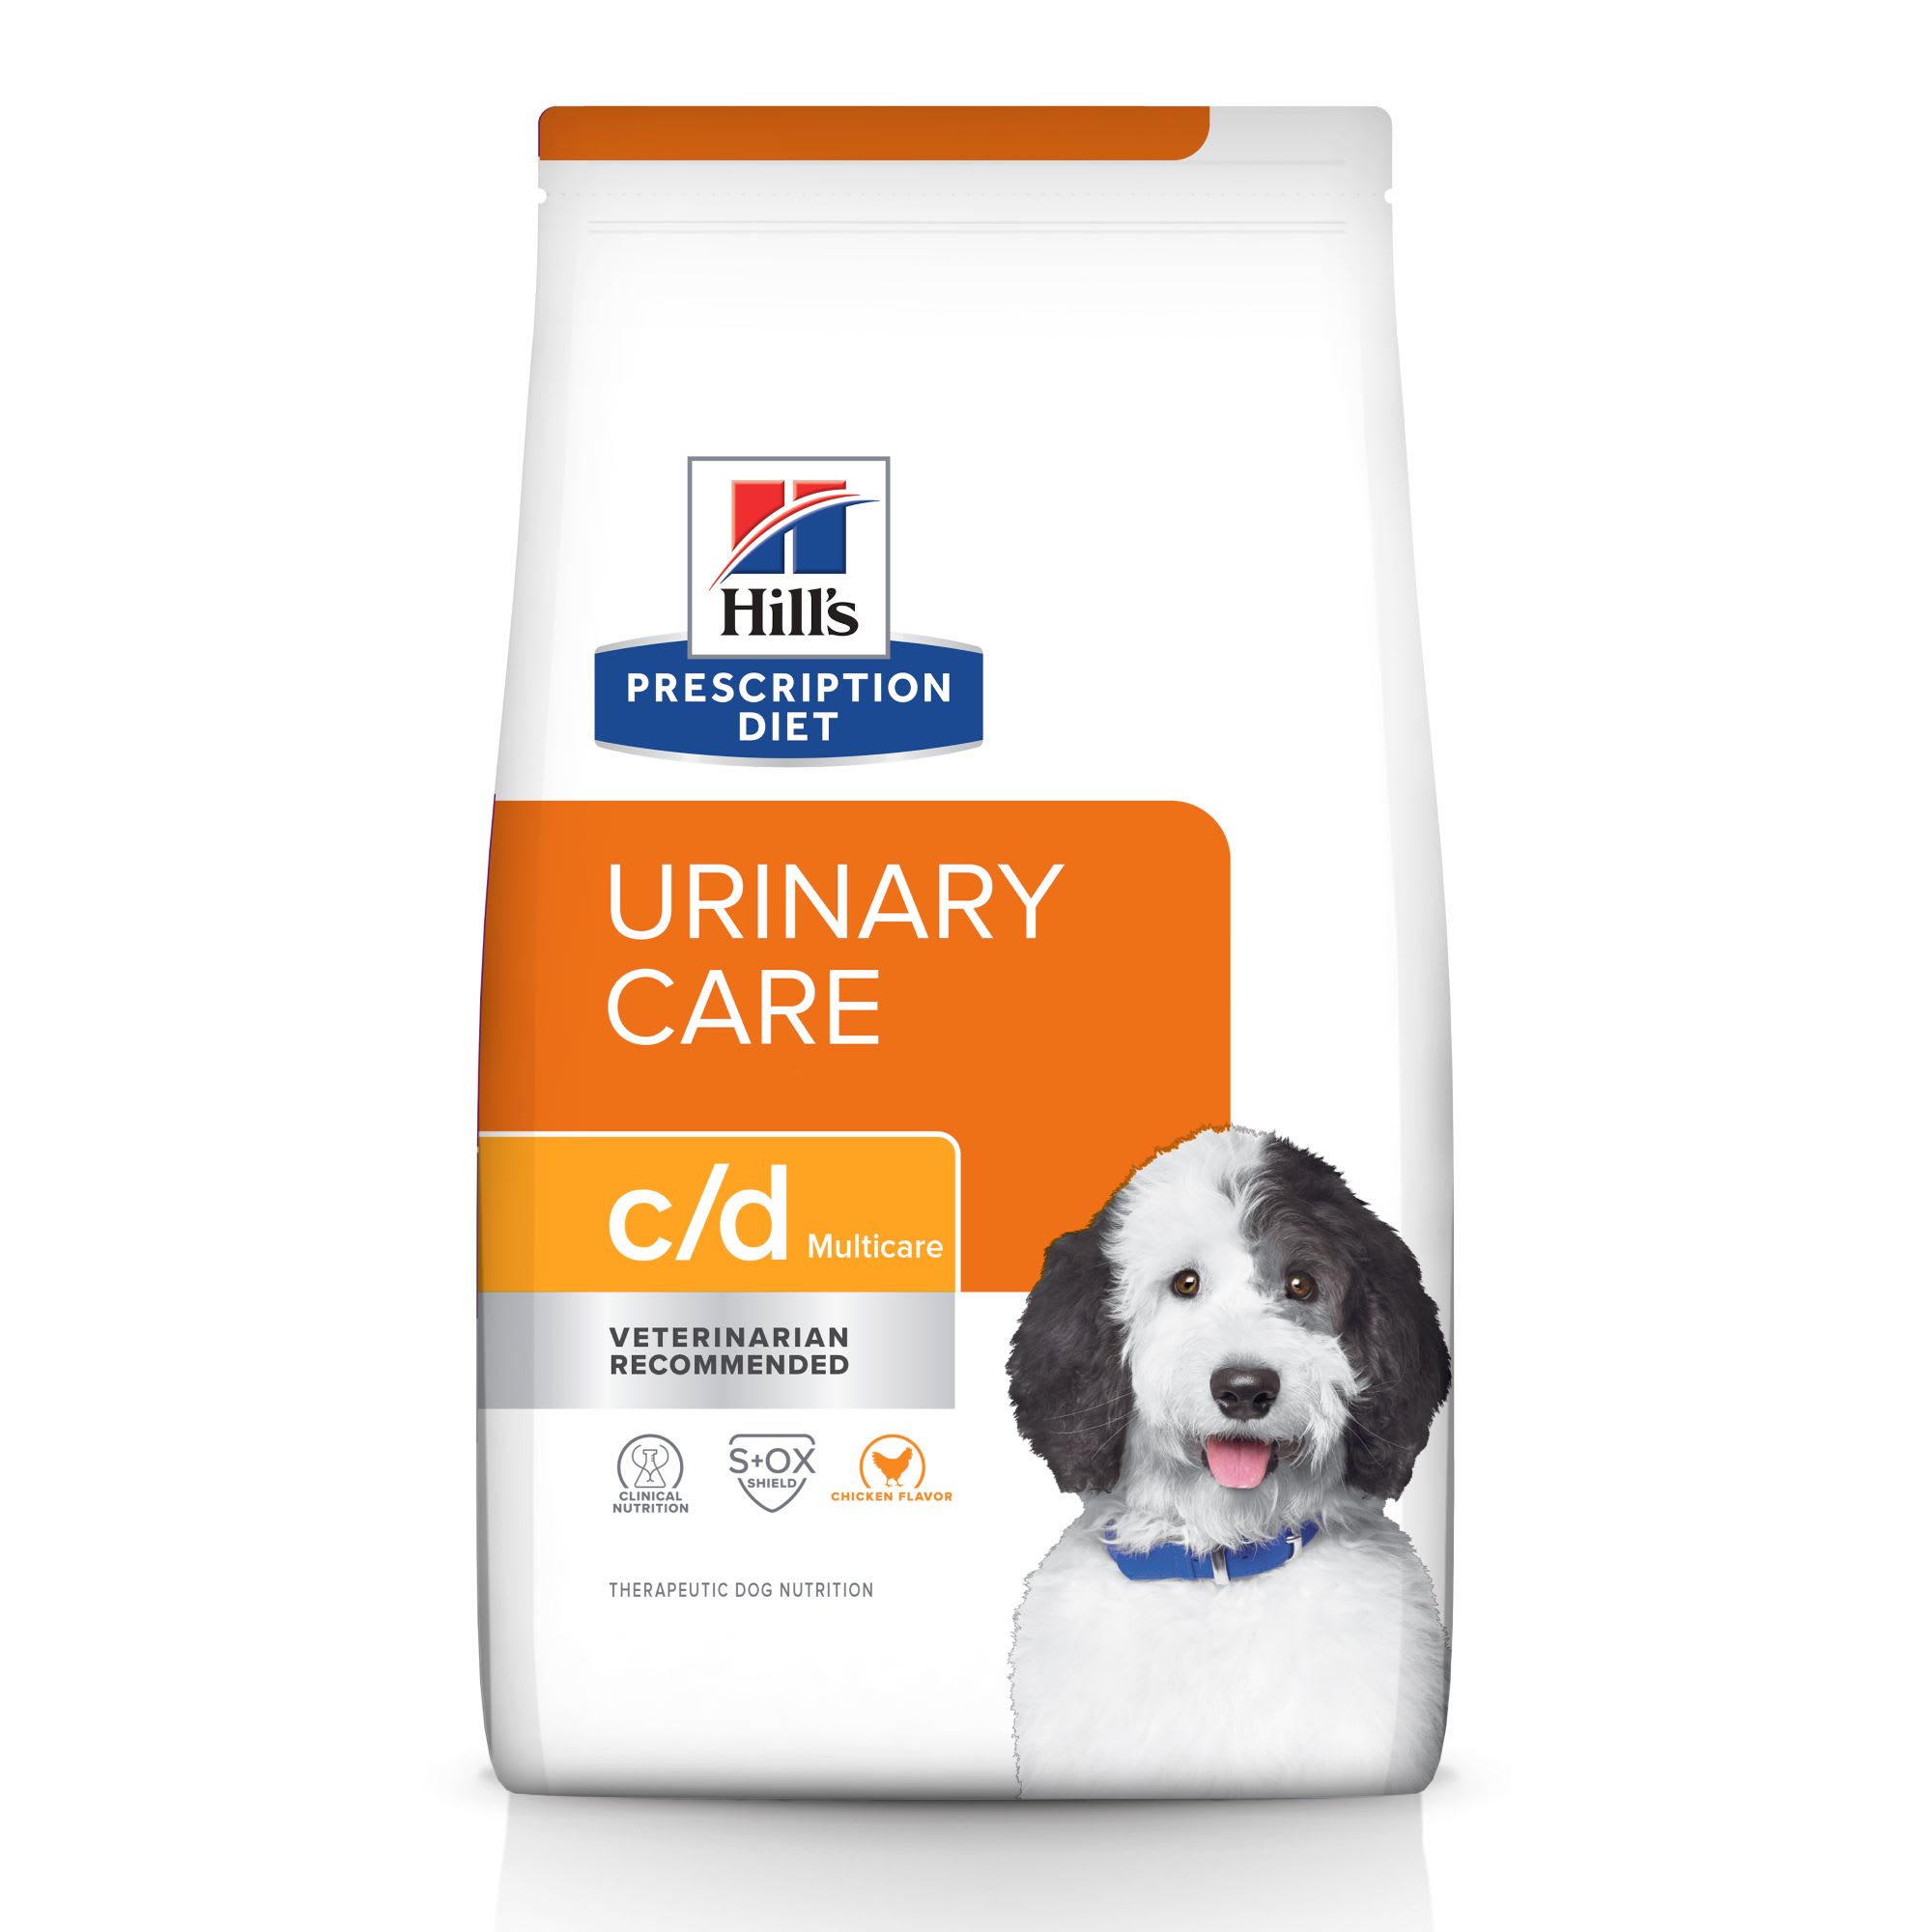 UPC 052742000213 product image for Hill's Prescription Diet - Dry Dog Food for Urinary Care, Hills CD Dog Food Chic | upcitemdb.com